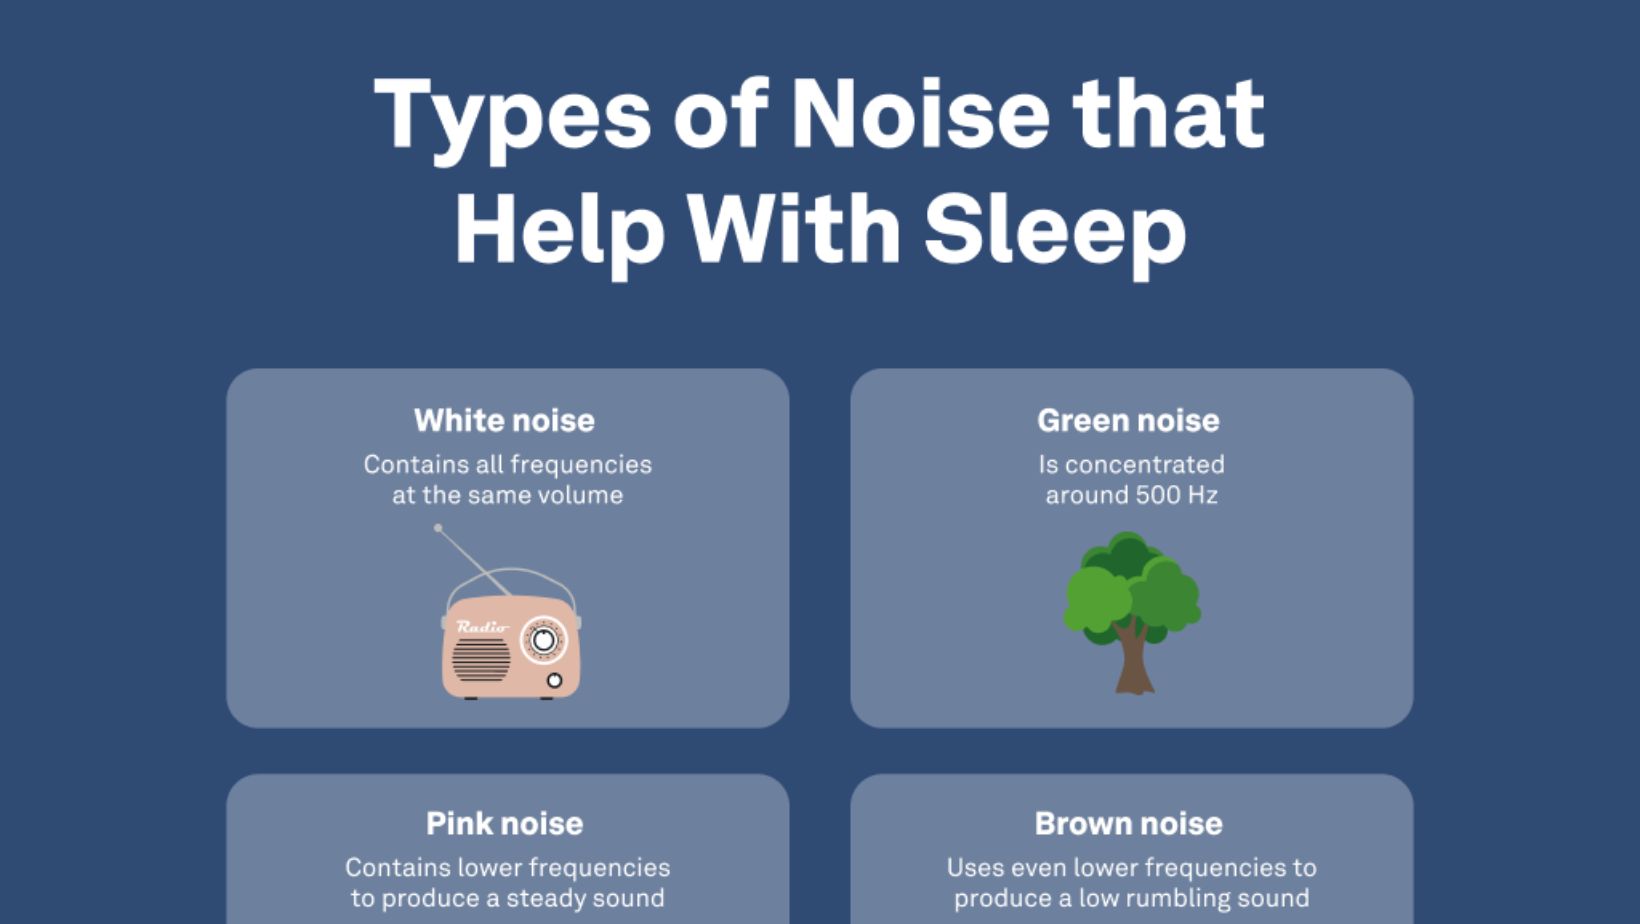 4 Key Benefits of Incorporating Green Noise in Your Space